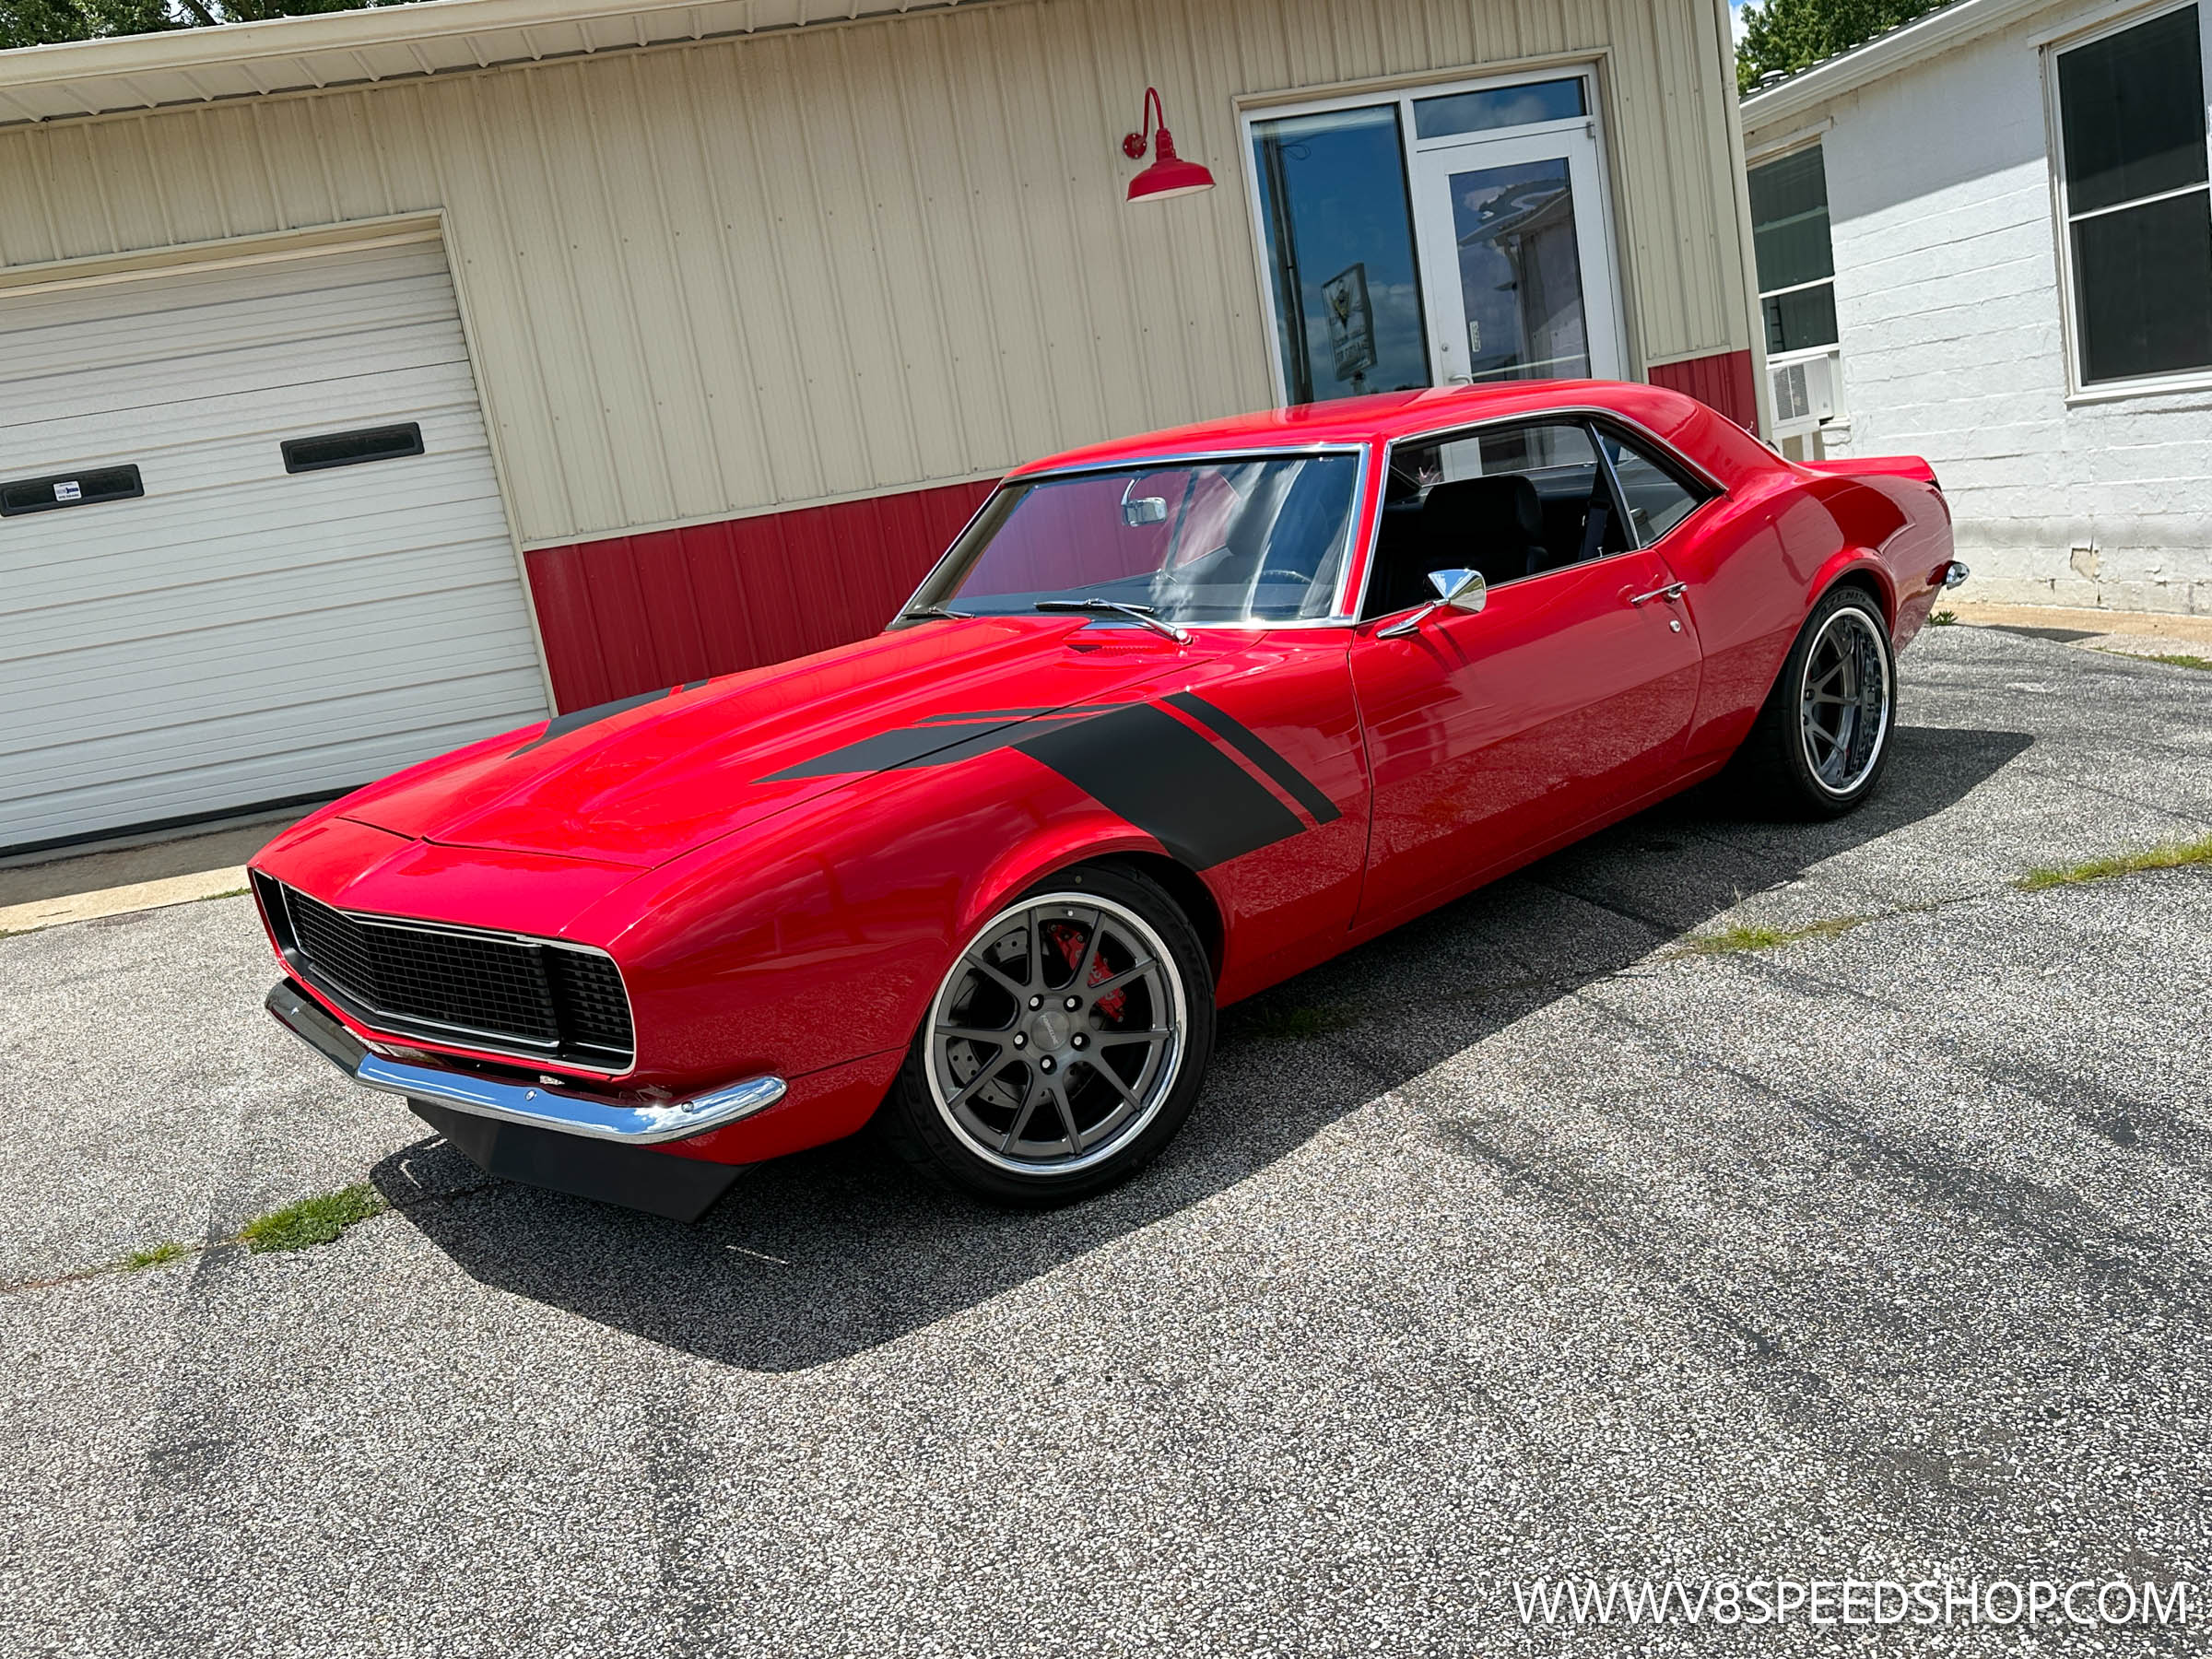 Pro-Touring 1968 Chevrolet Camaro Supercharged LSA Swap at V8 Speed and Resto Shop